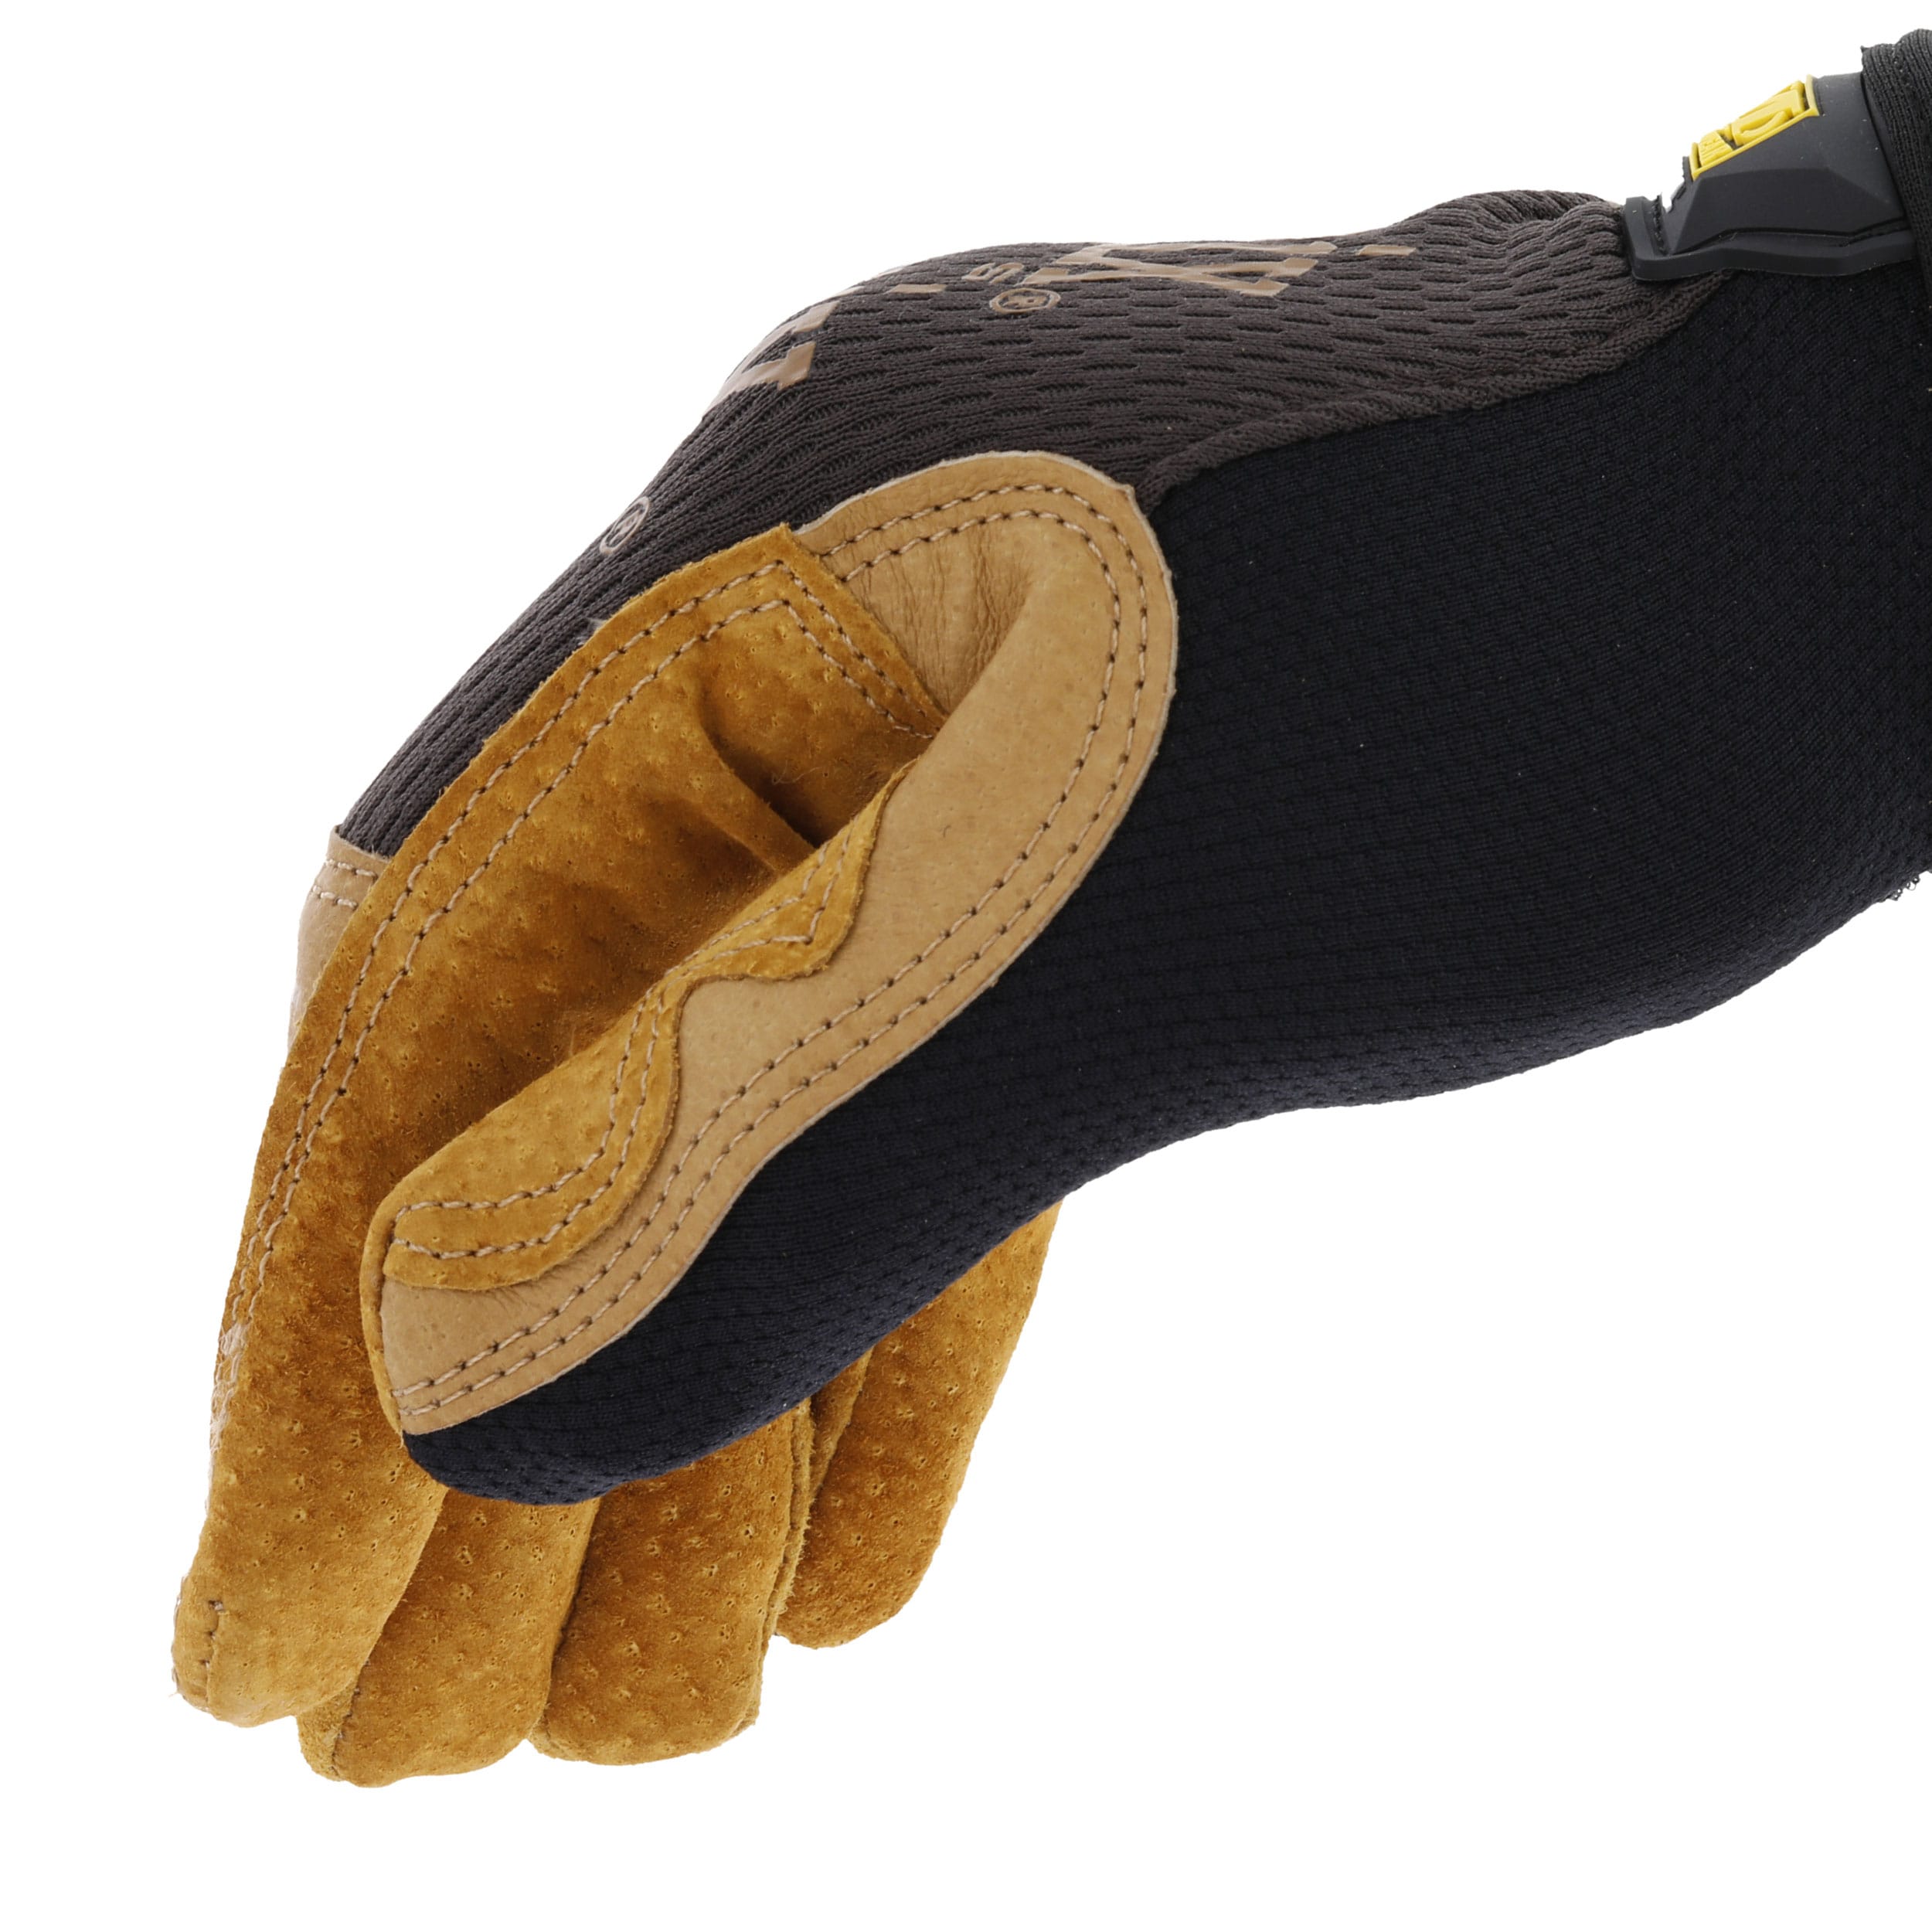 Mechanix Wear: The Original Material4X Synthetic Leather Work Gloves with  Secure Fit, Abrasion Resistant, Added Durability, Safety Gloves for Men